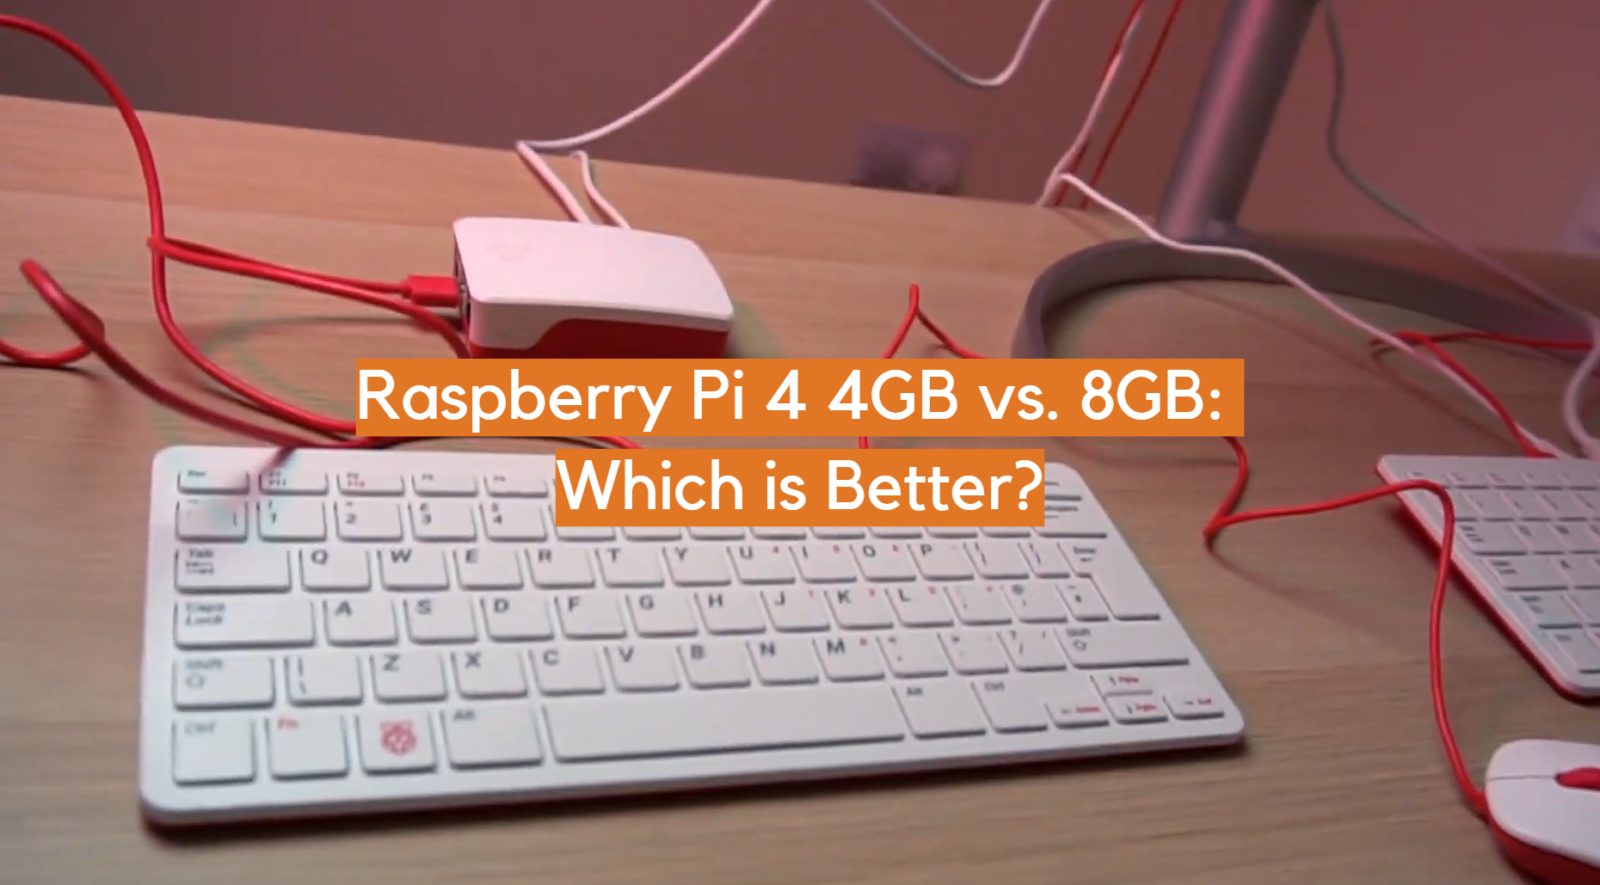 Raspberry Pi 4 4GB vs. 8GB: Which is Better?